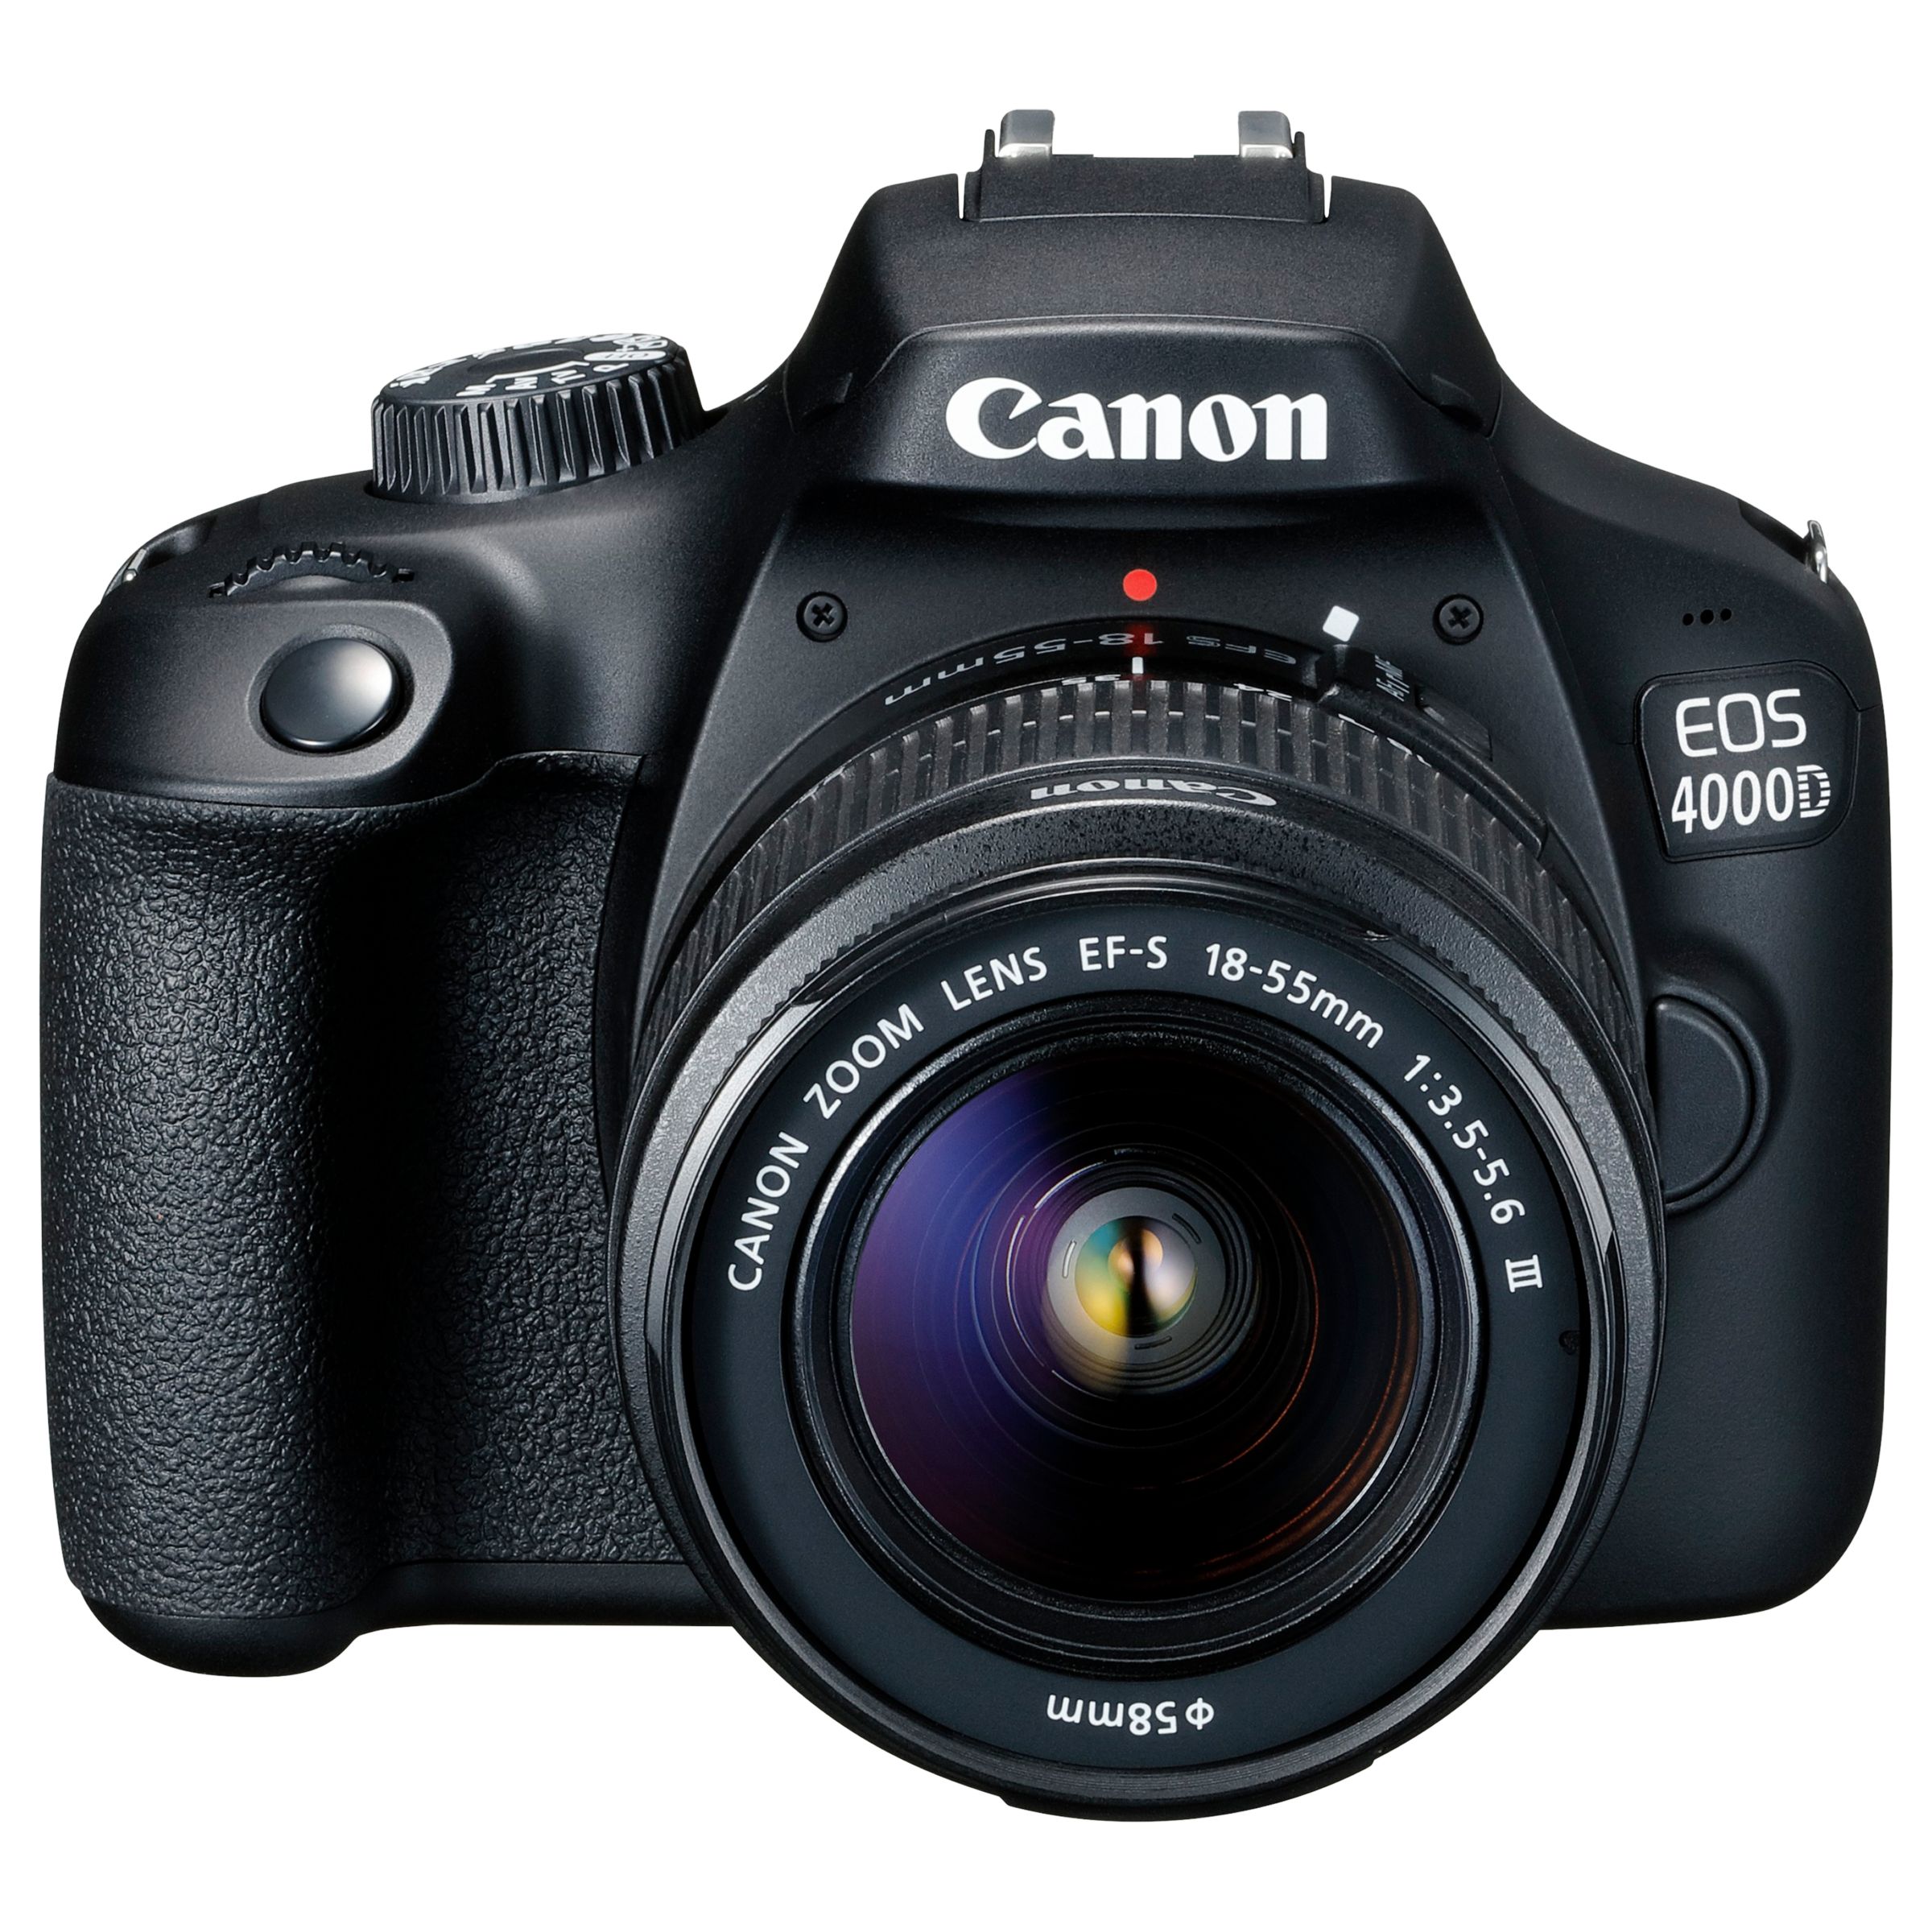  Canon  EOS 4000D Digital SLR Camera  with 18 55mm f 3 5 5 6 